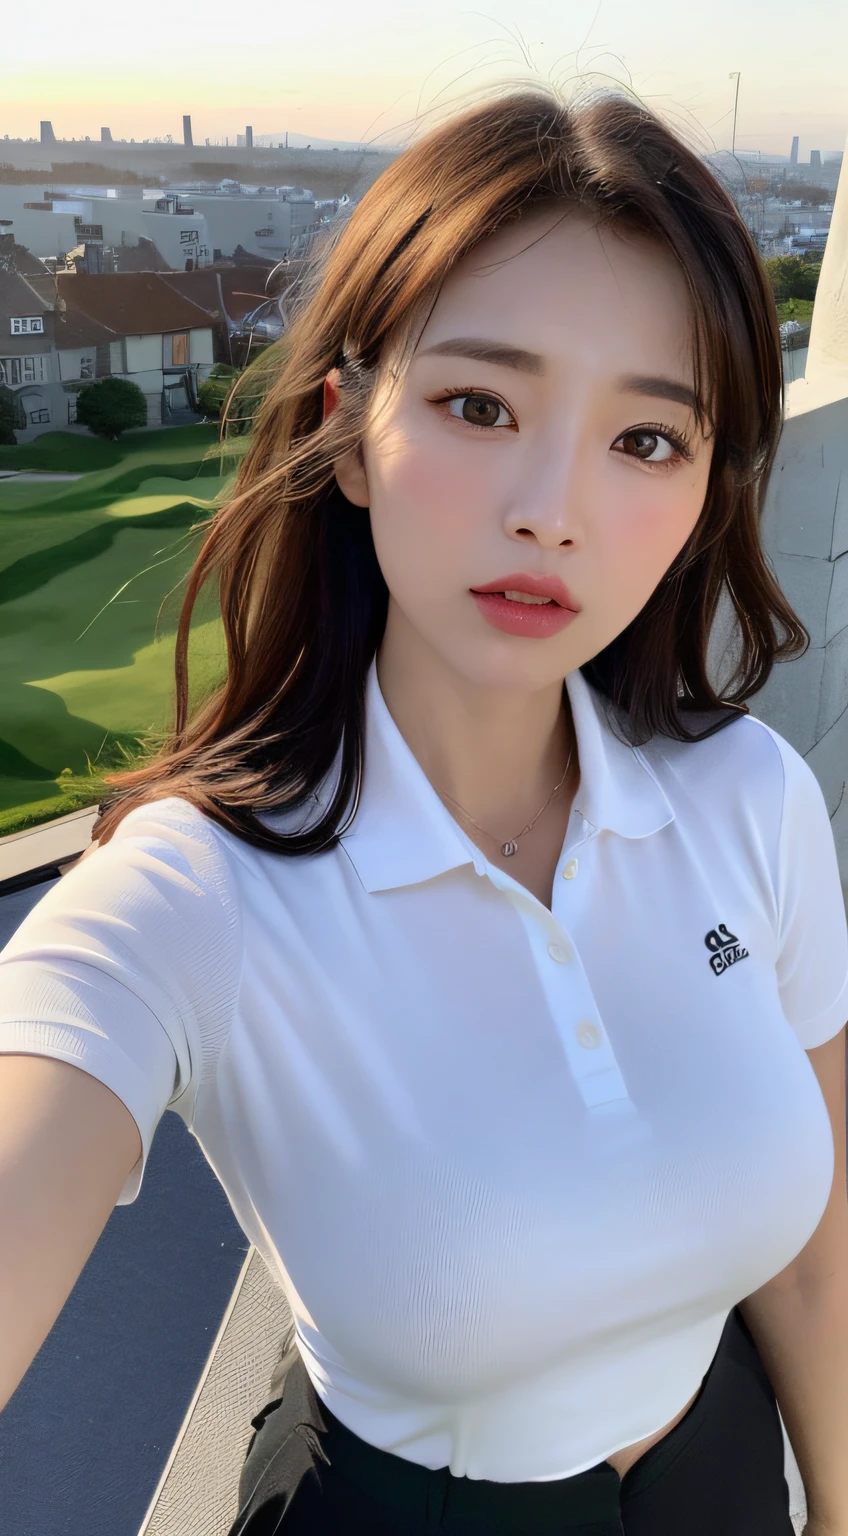 ((Midnight、sthe highest qualit、8k、MASTERPIECE:1.3)), all body, Long legs, sharp-focused:1.2, Beautiful woman with perfect body shape:1.4, slender abs:1.1, ((dark brown  hair、Huge Tits:1.2)), (White Tight Golf Wear、standing a:1.2), ((Night City View、Rooftop:1.3)), Very detailed face and skin texture, detailled eyes, Double eyelidd, On a sunny golf course